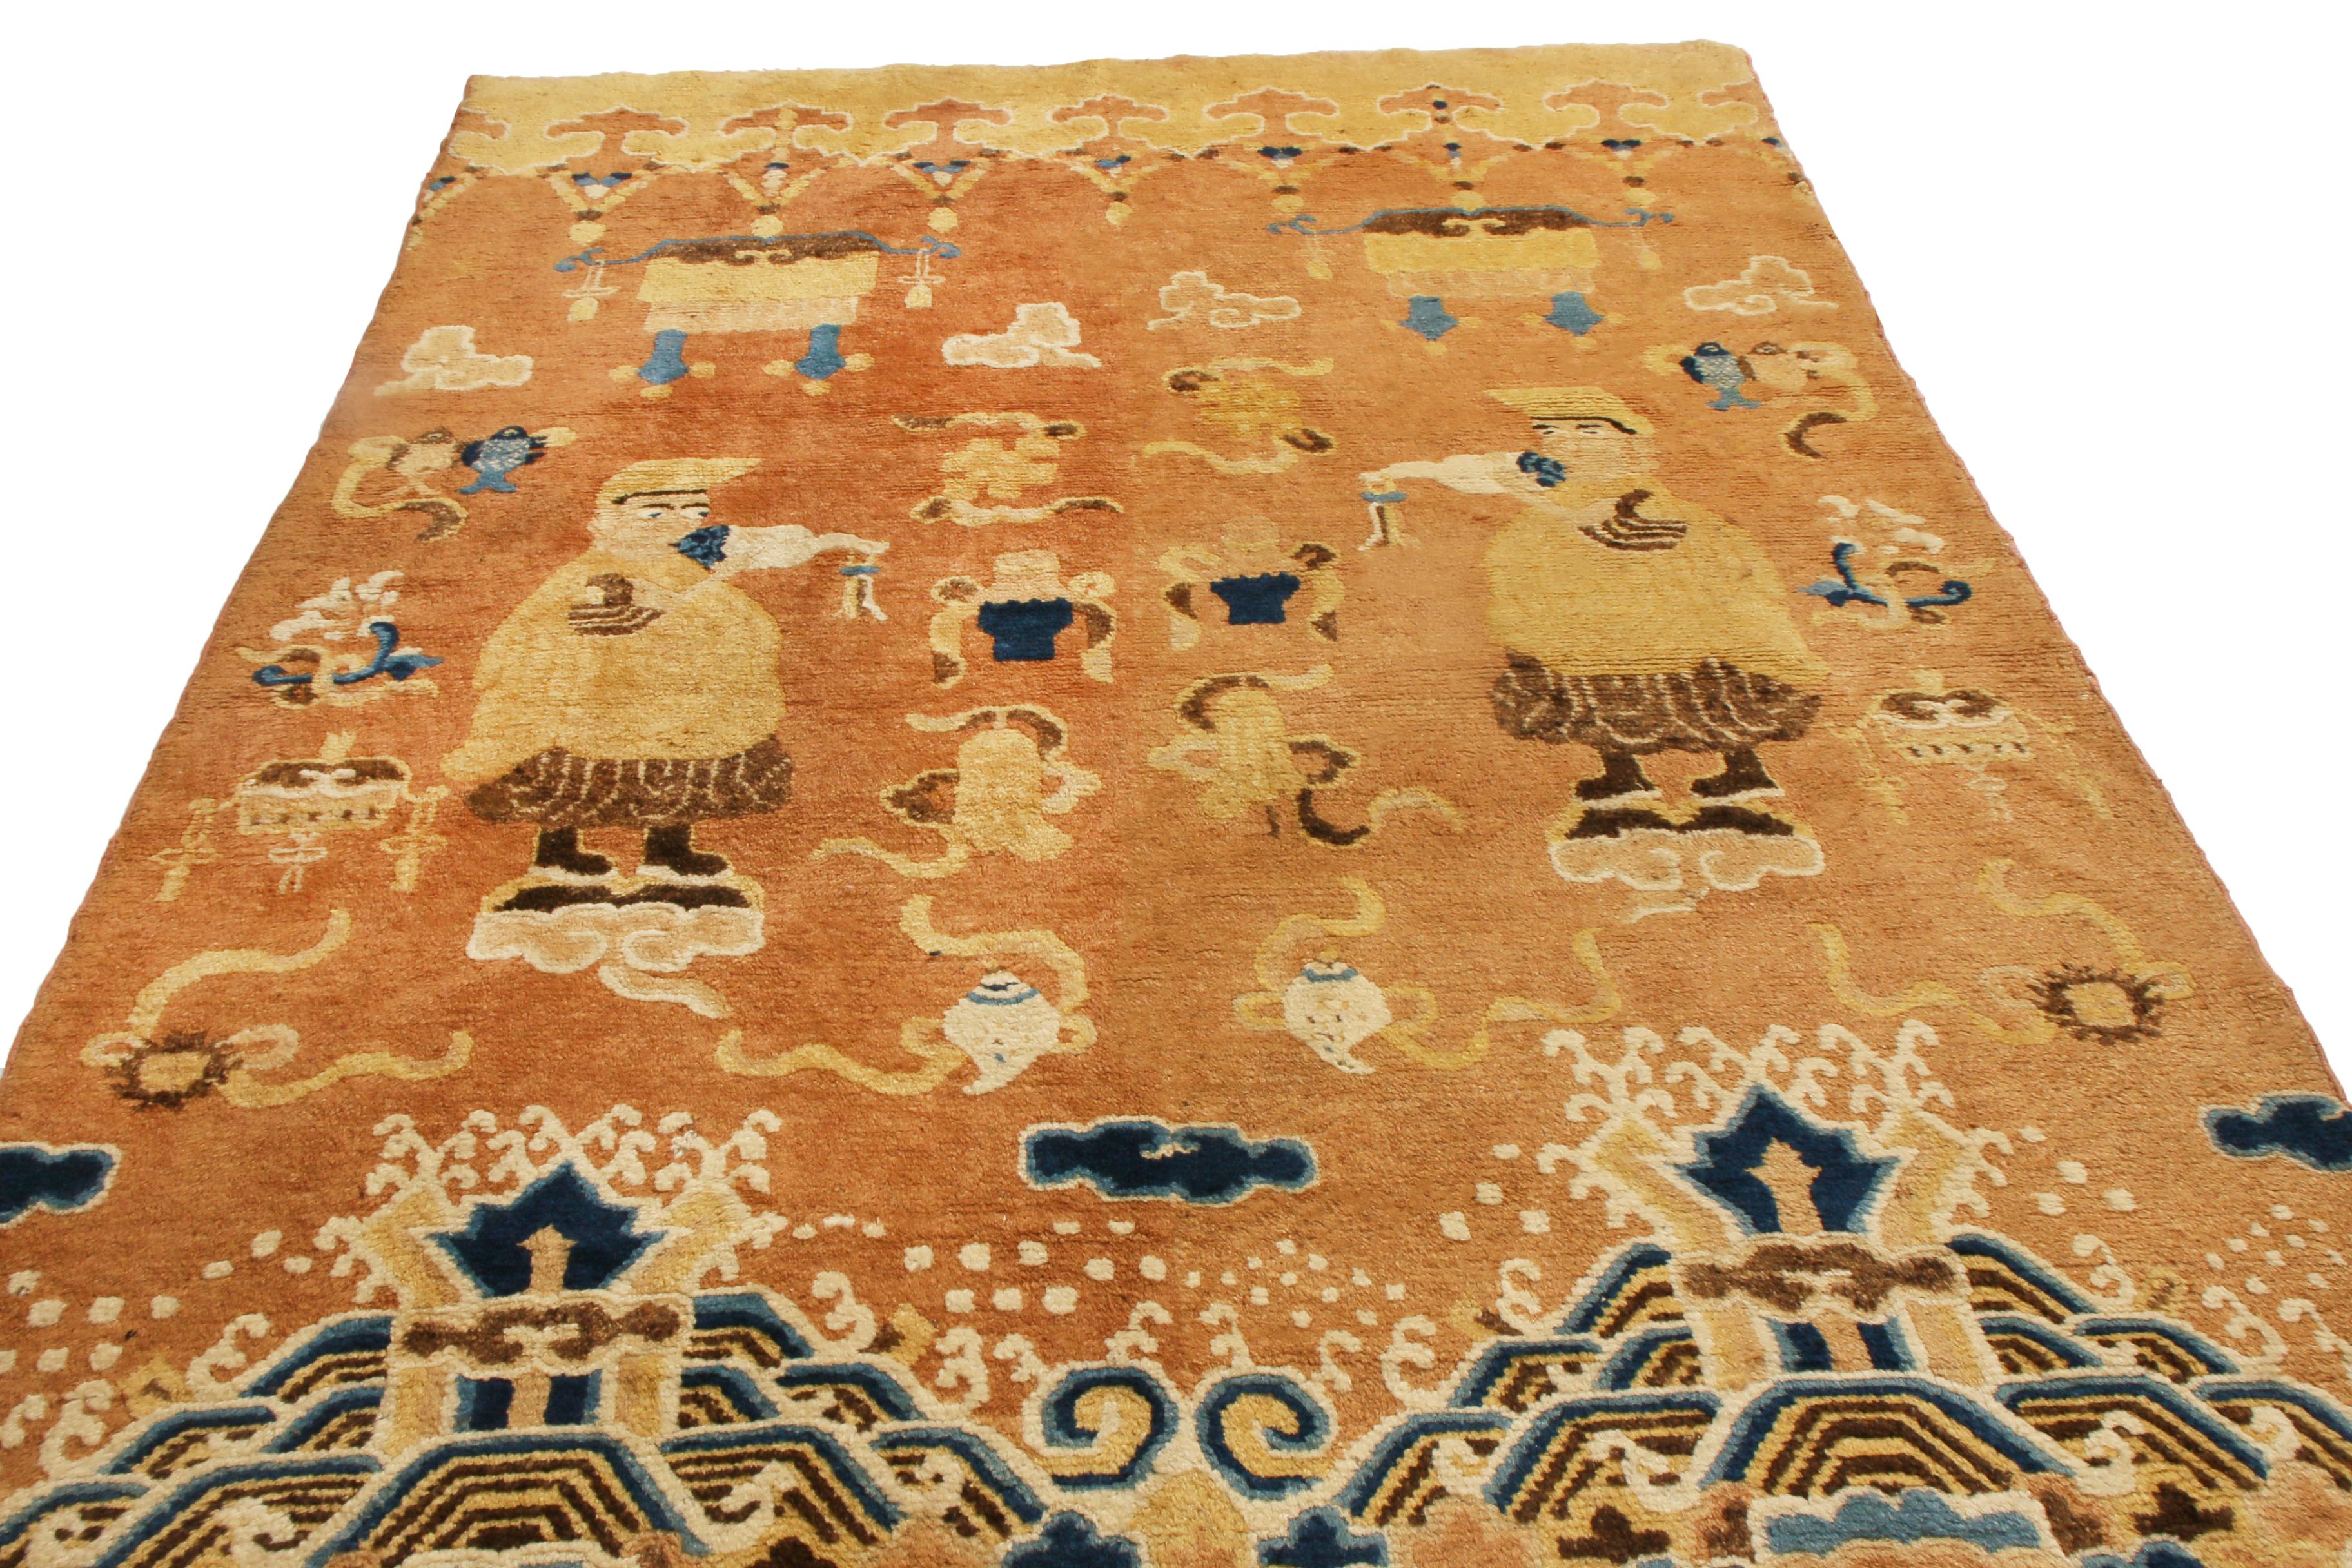 A splendid 4 x 7 Peking rug of sought-after Chinese antiquity in a traditional Peking style floral pattern. Hand knotted in wool circa 1920-1930, the design displays a pictorial representation of traditional art belonging to the period that spans